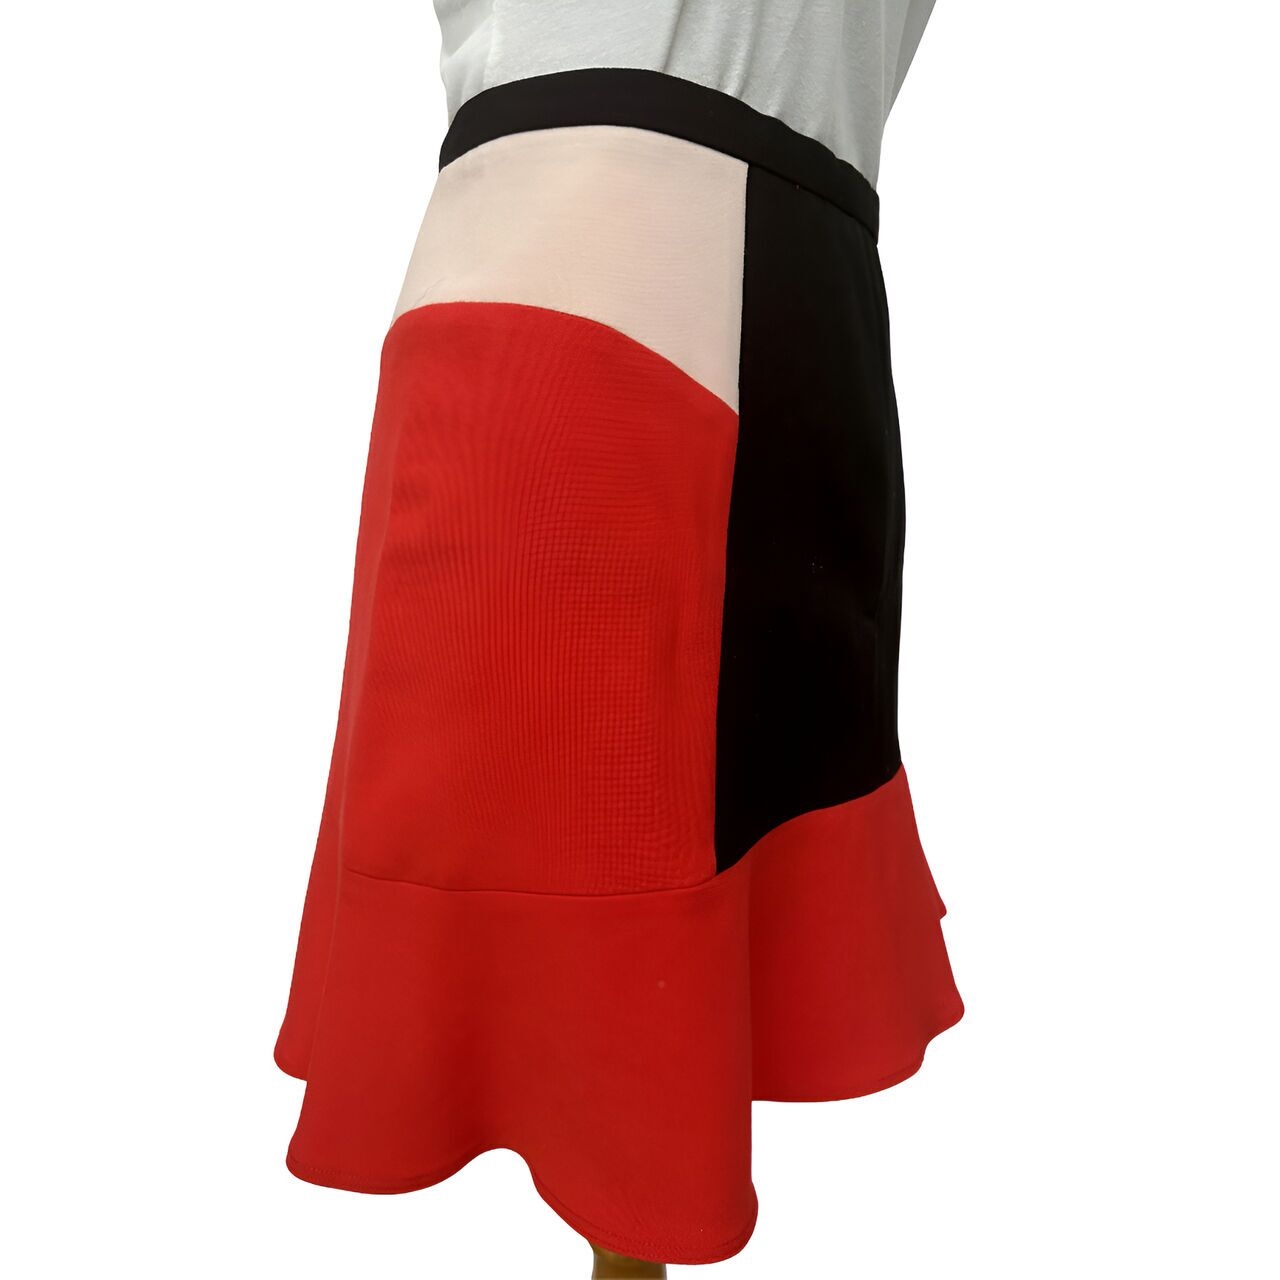 Zara Flare Color Block Mini Skirt in Red, Pink, and Black 